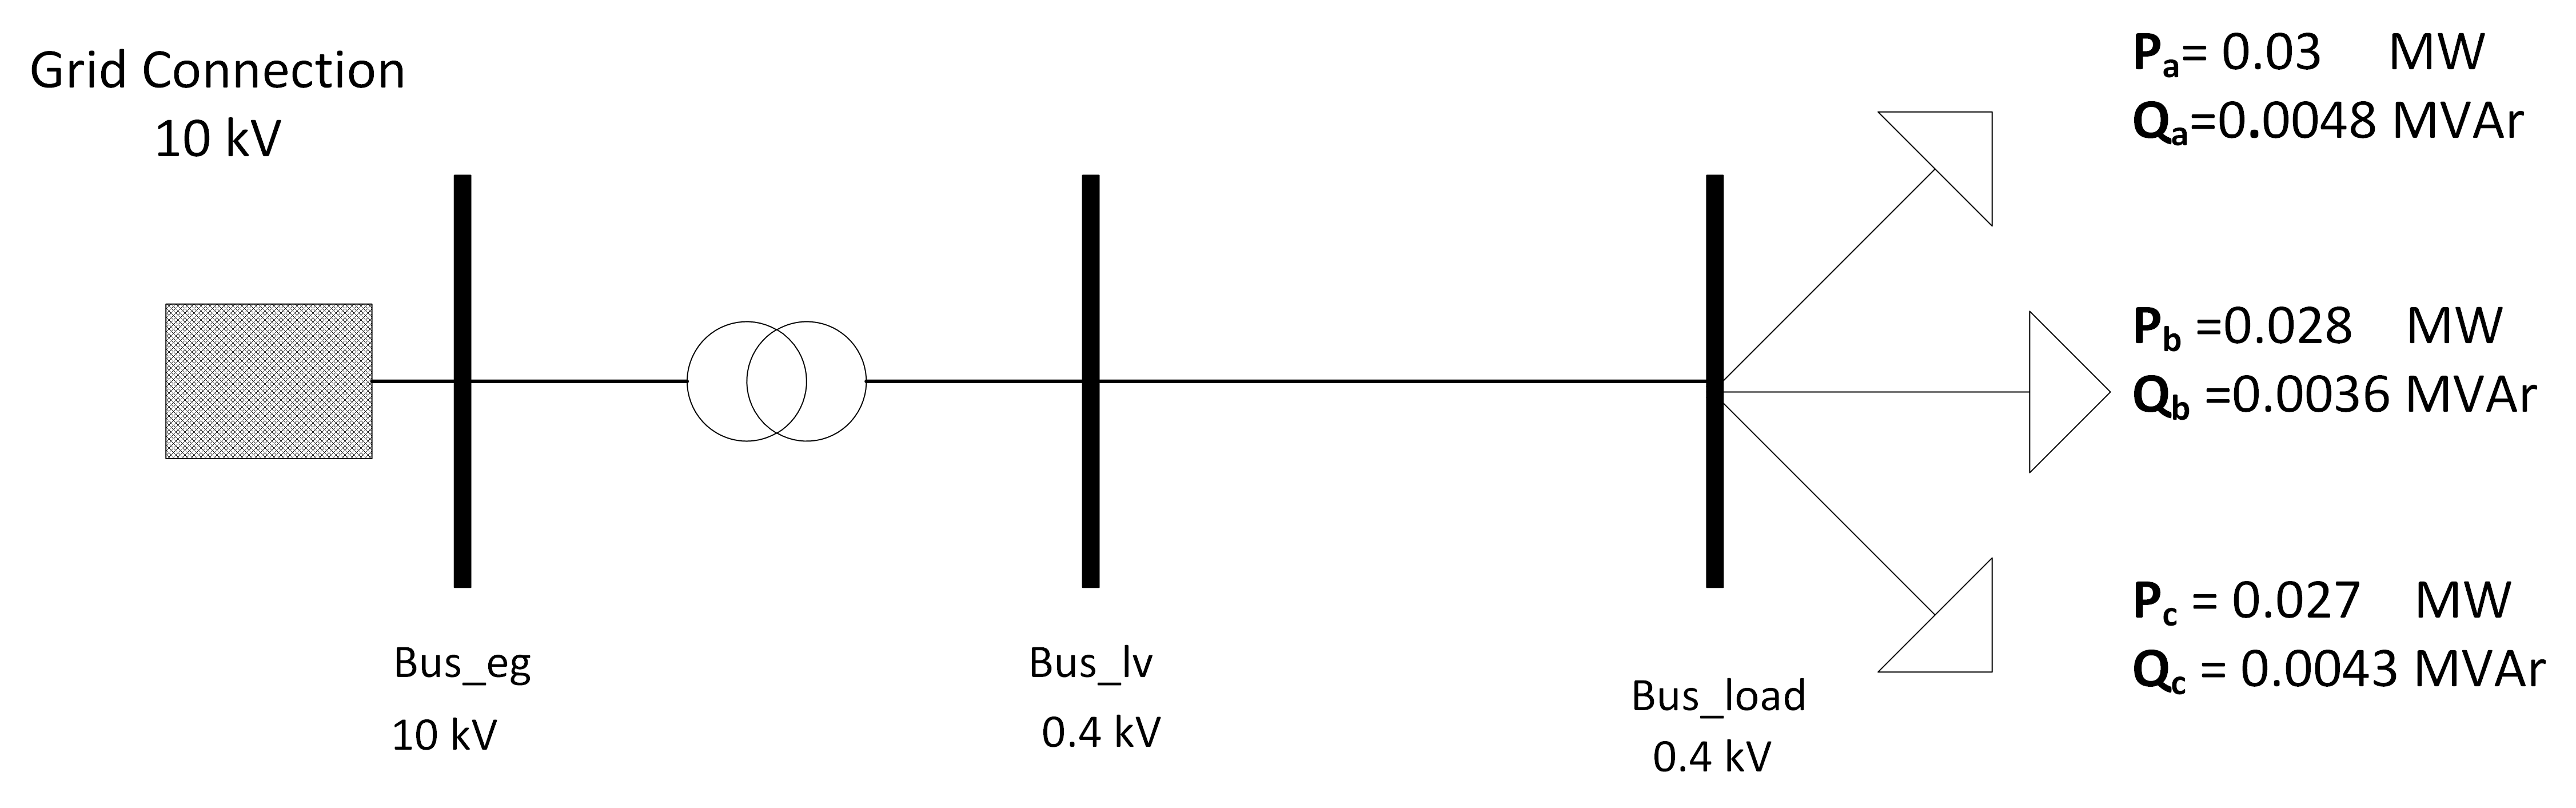 Three bus system.png